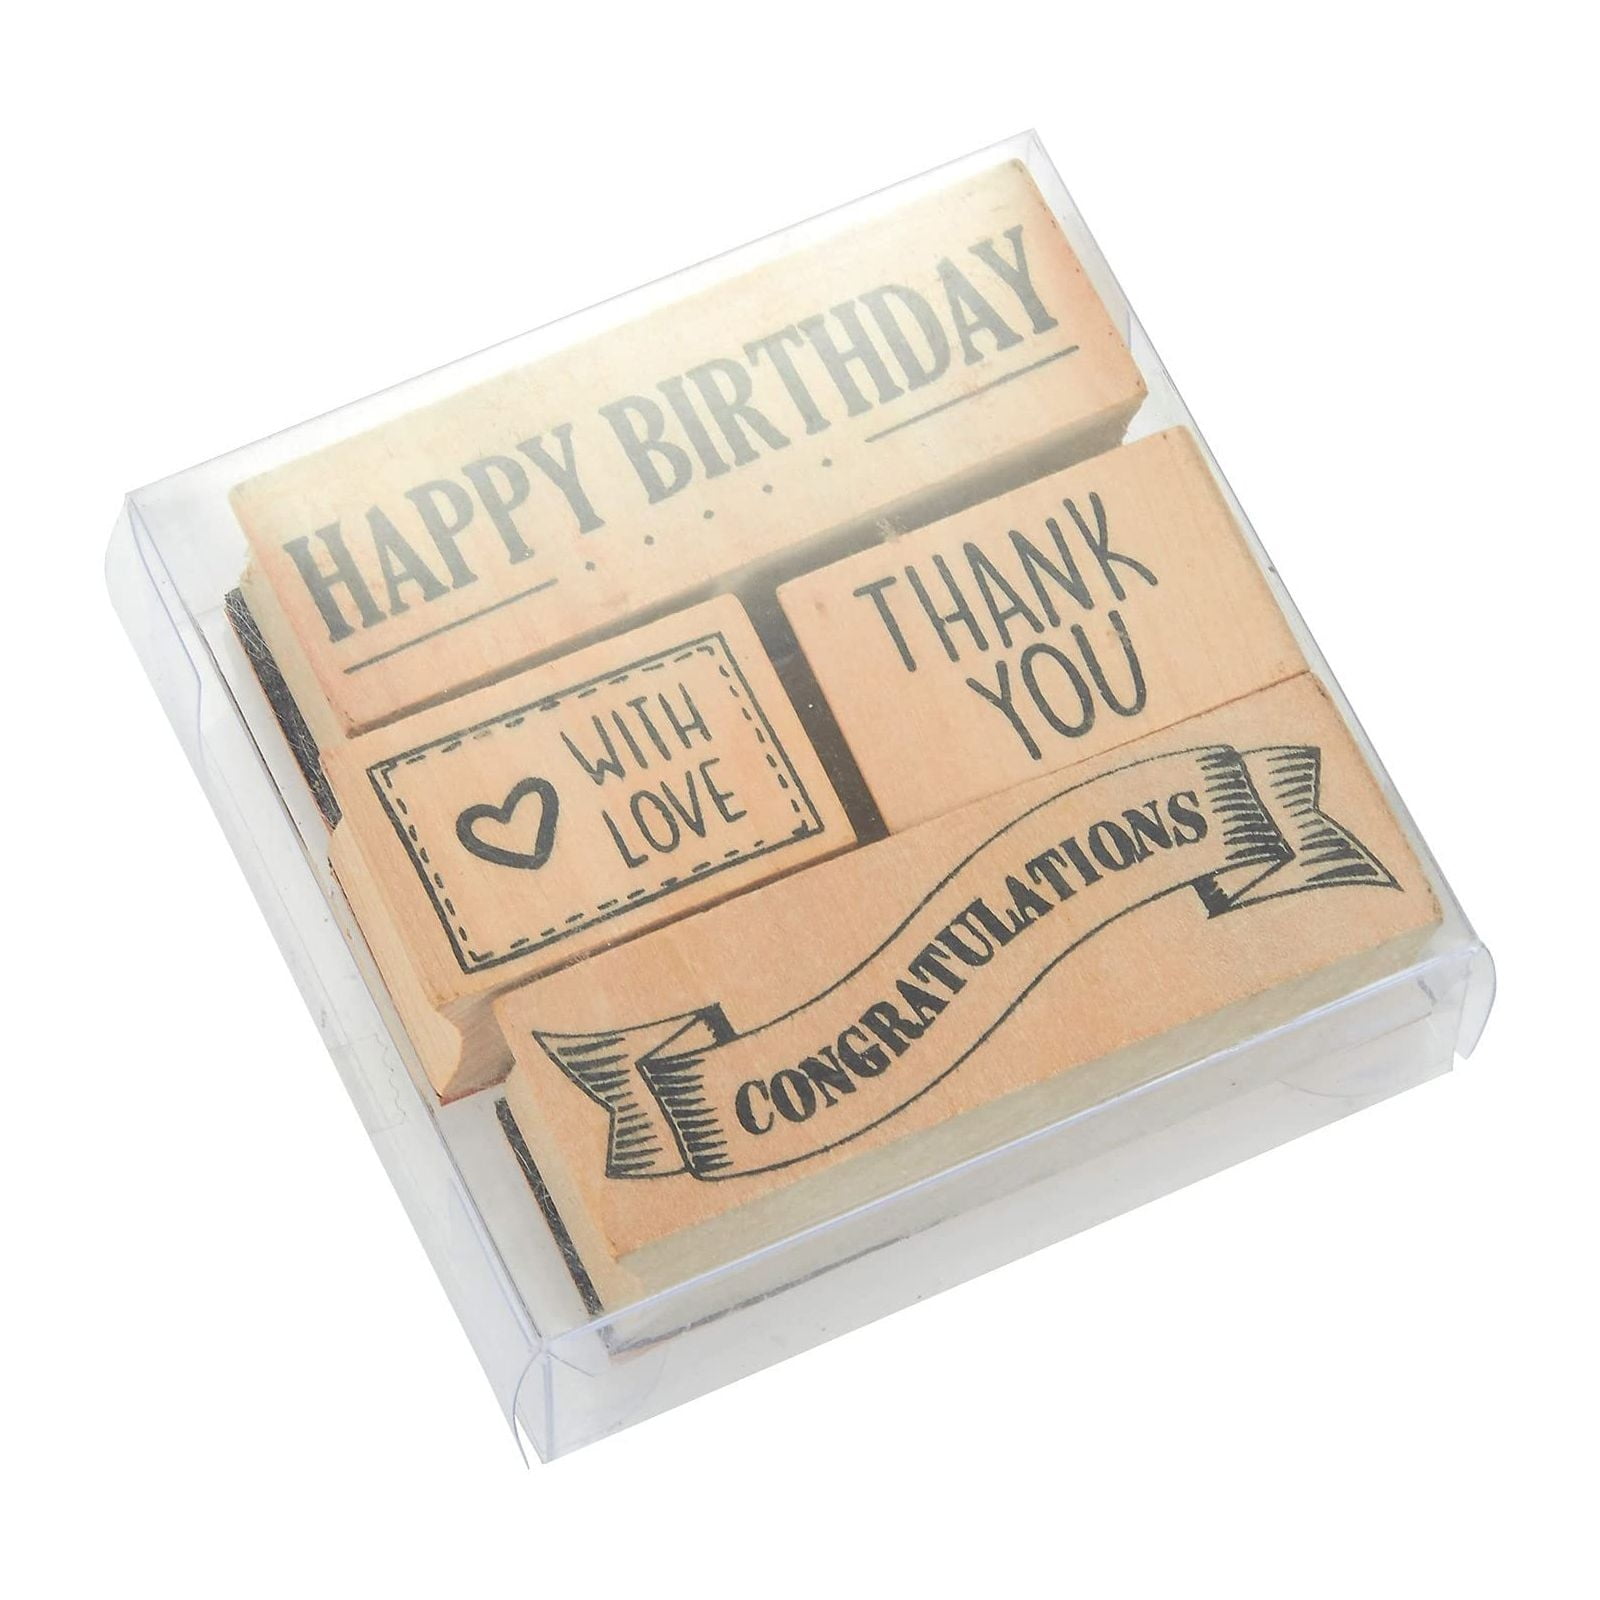 Juvale 4-Piece Card Making Stamps Set - Wood Mounted Rubber Stamps for Card Making DIY Crafts Scrapbooking - Happy Birthday Thank You Congratulations